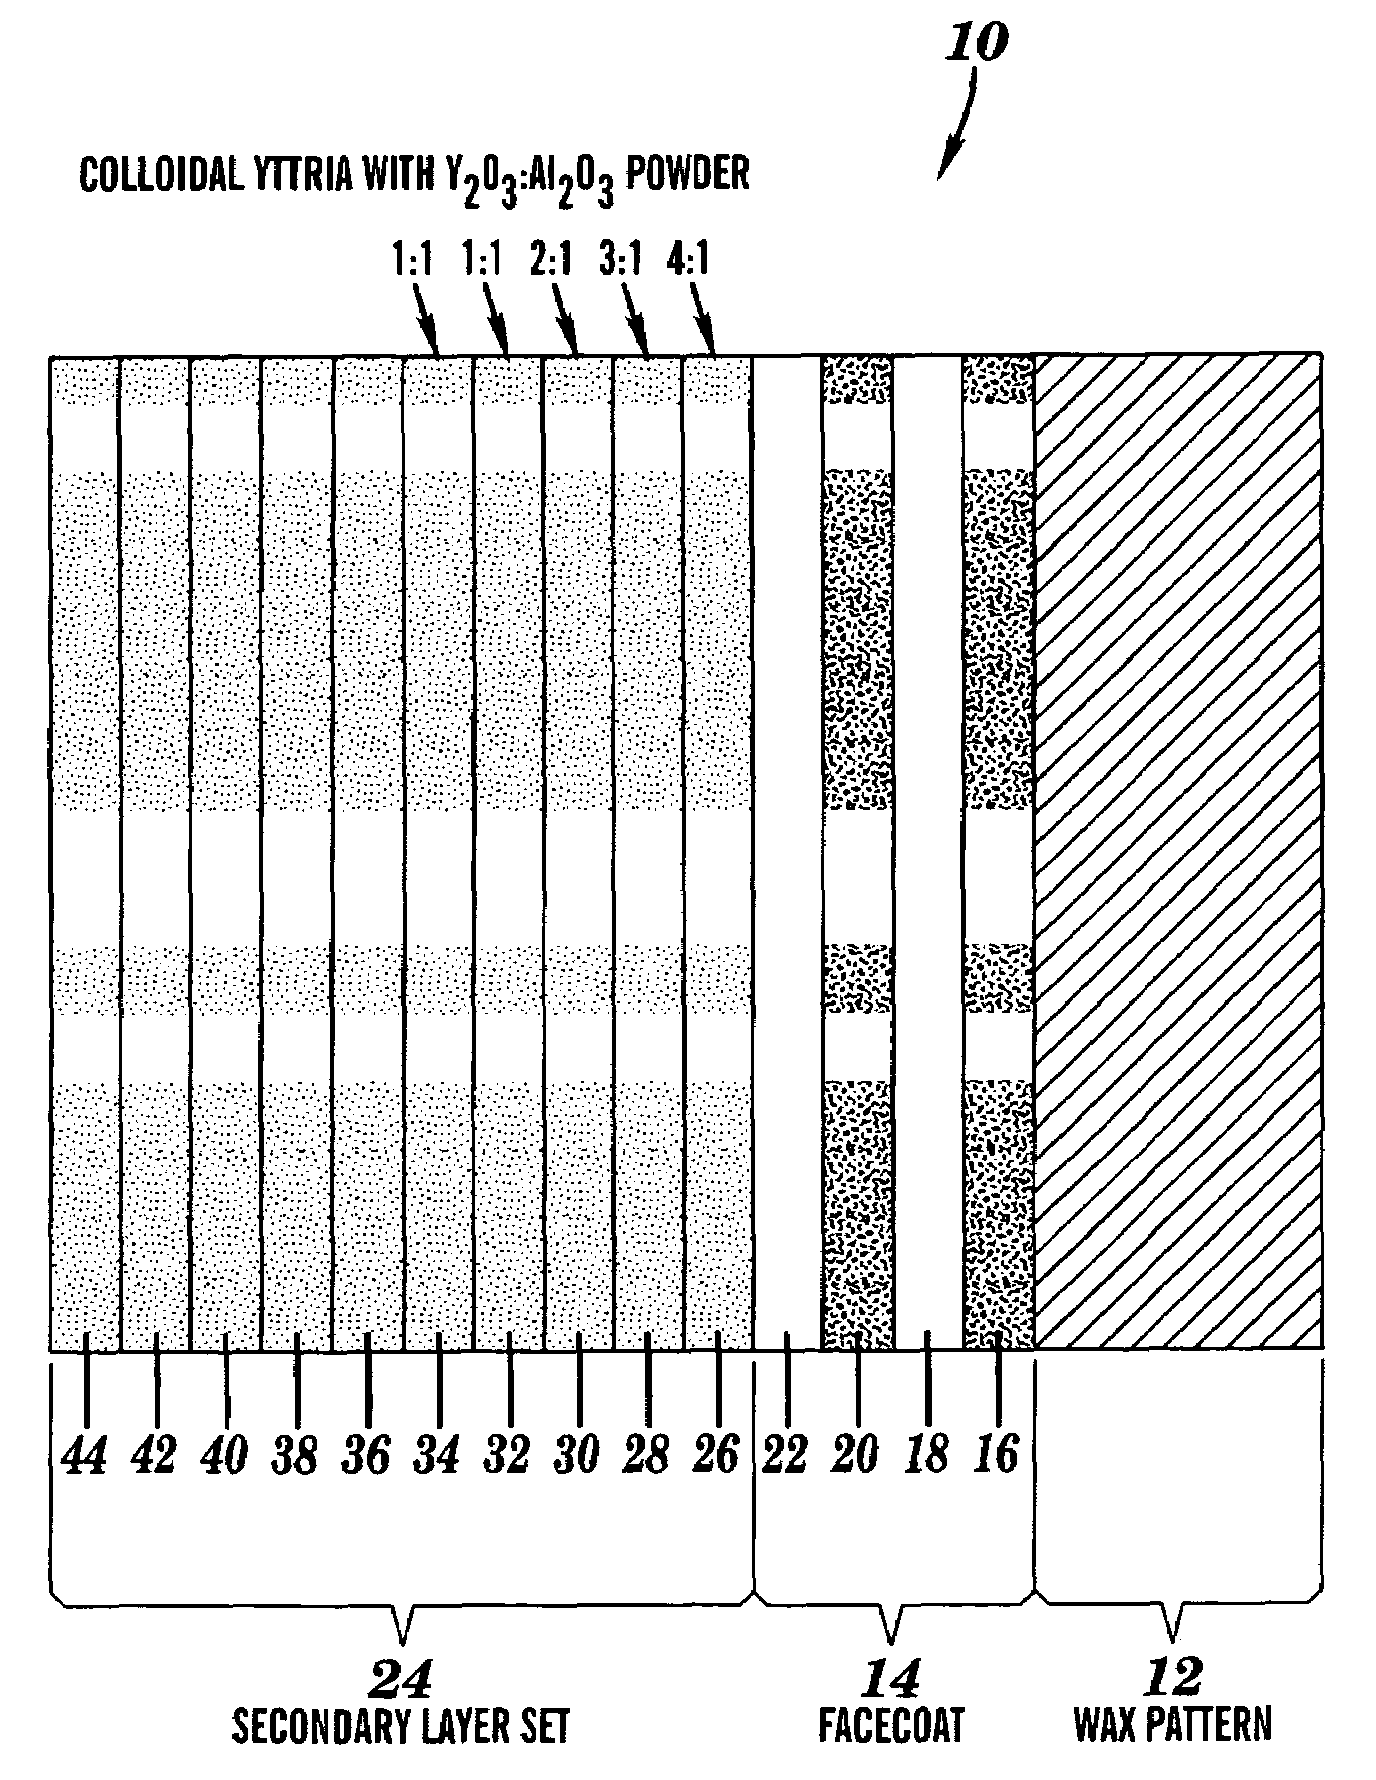 Shell mold for casting niobium-silicide alloys, and related compositions and processes